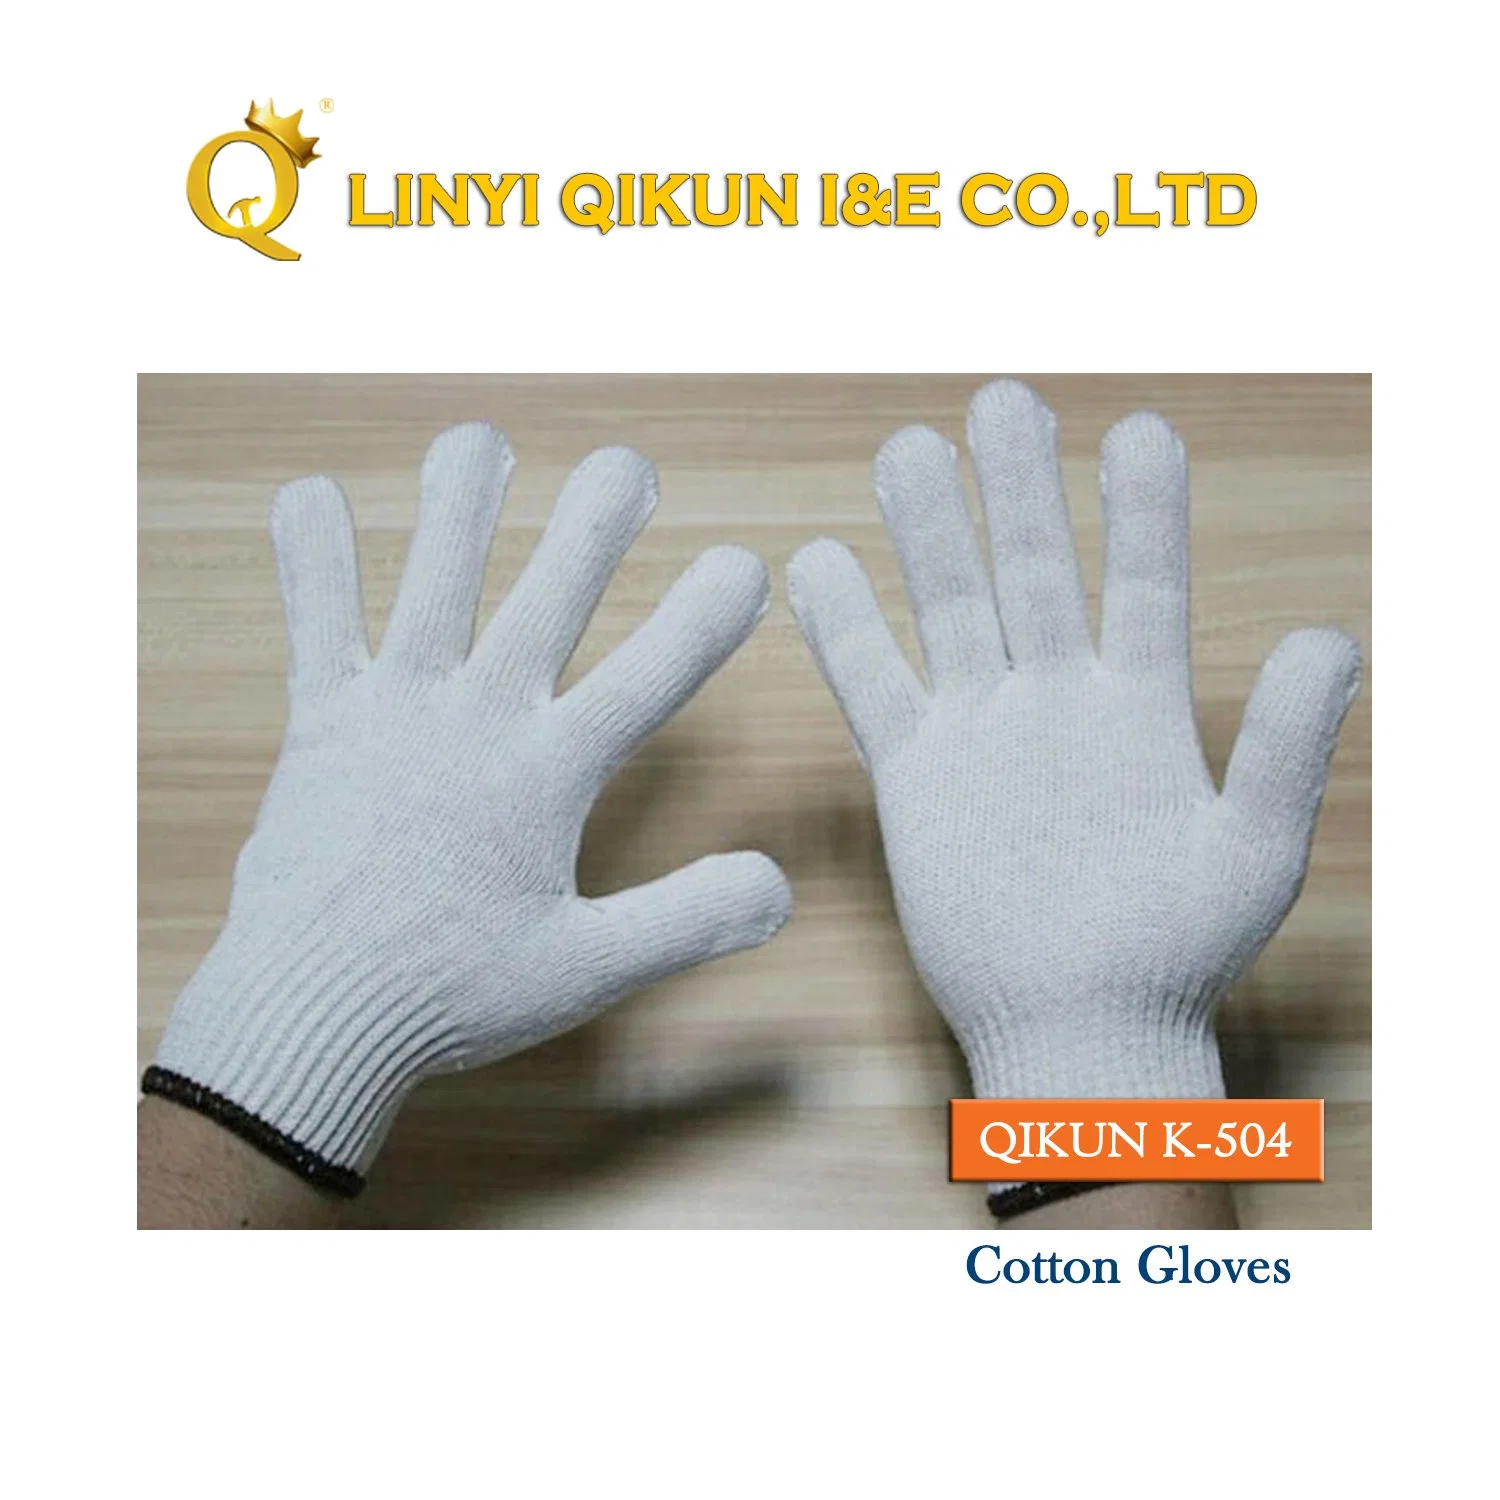 K-503 7 Gauge Knitted Working Cotton Nitrile Latex Industrial Safety Labor Protect Glove